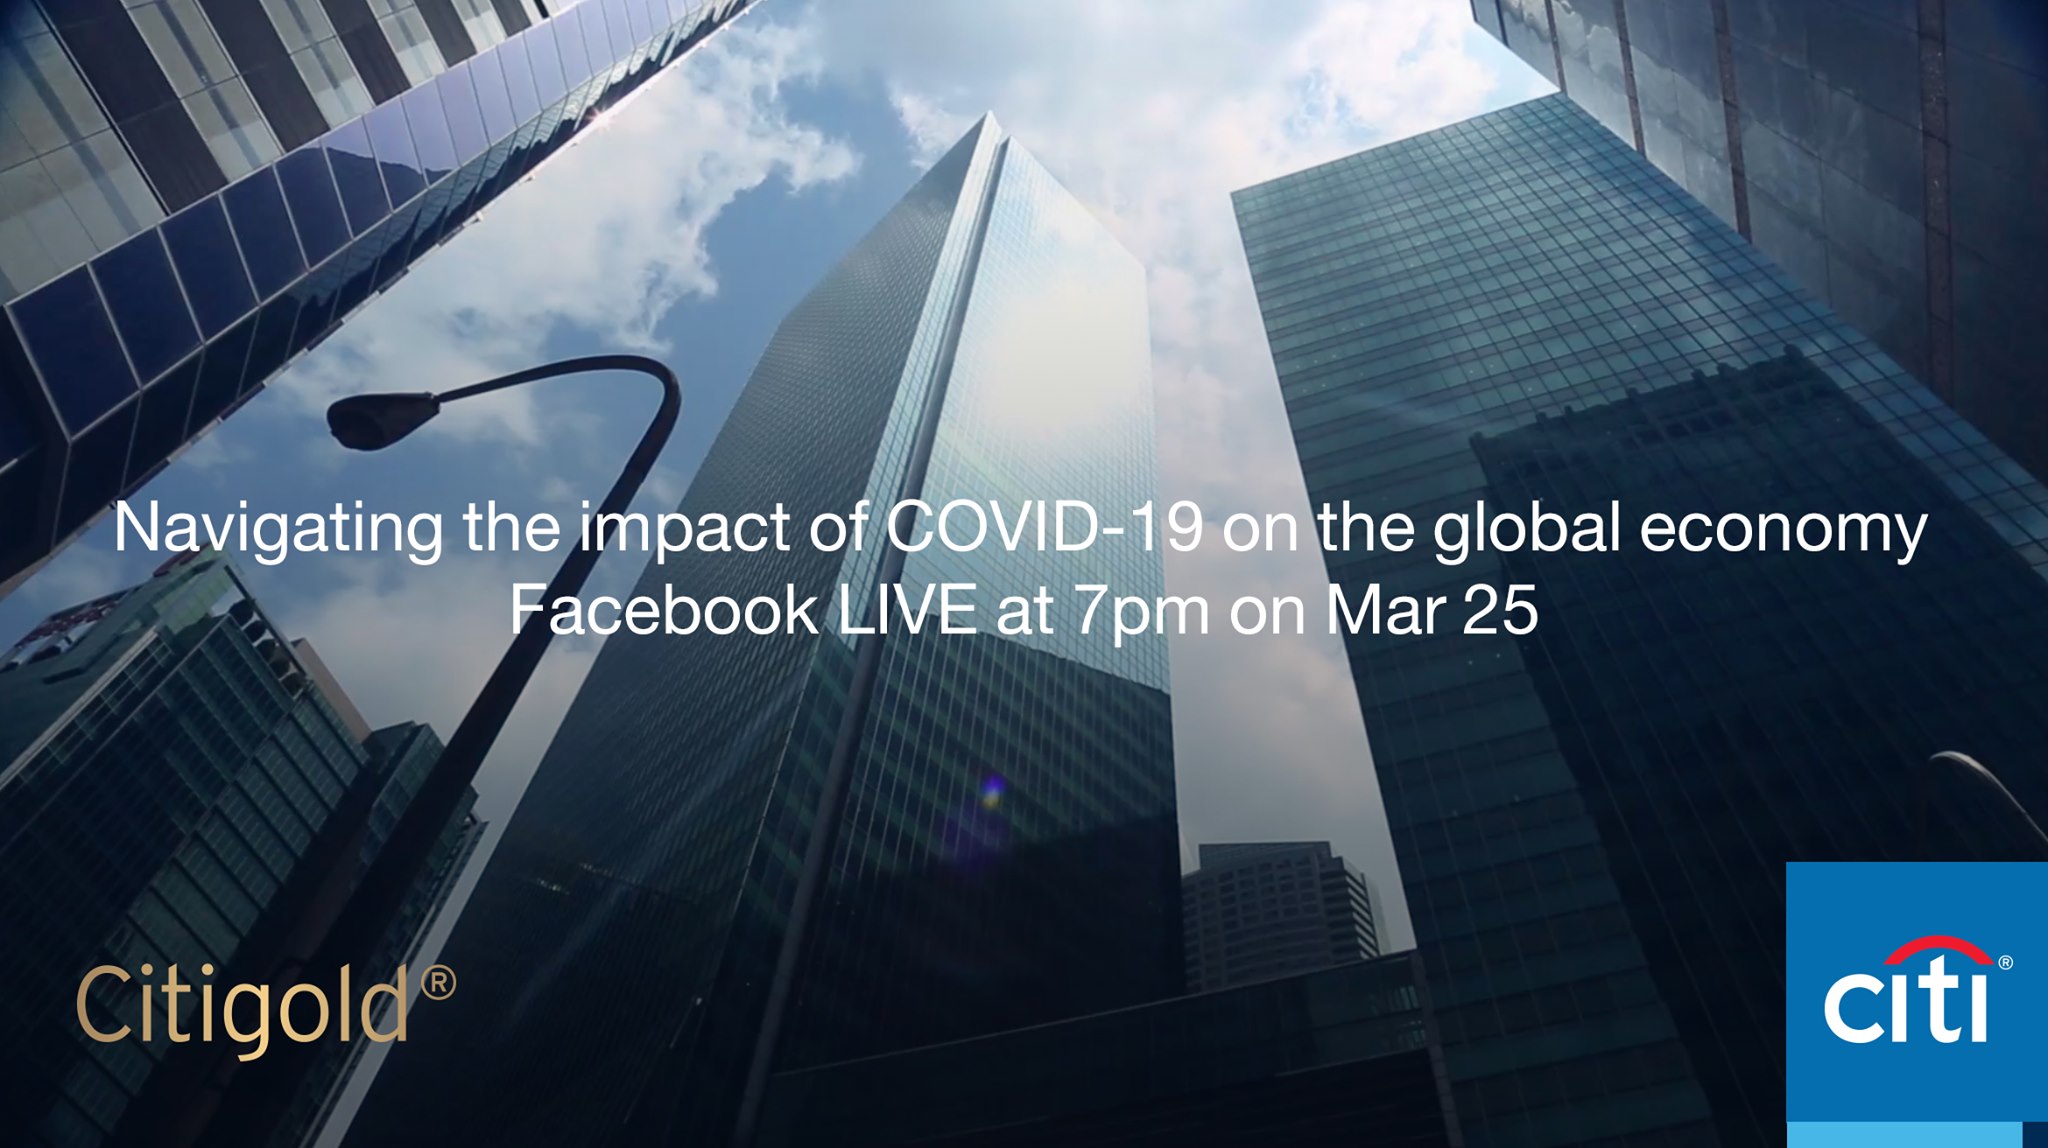 【Navigating the impact of COVID-19 on the global economy. Facebook LIVE at 7pm on Mar 25.】